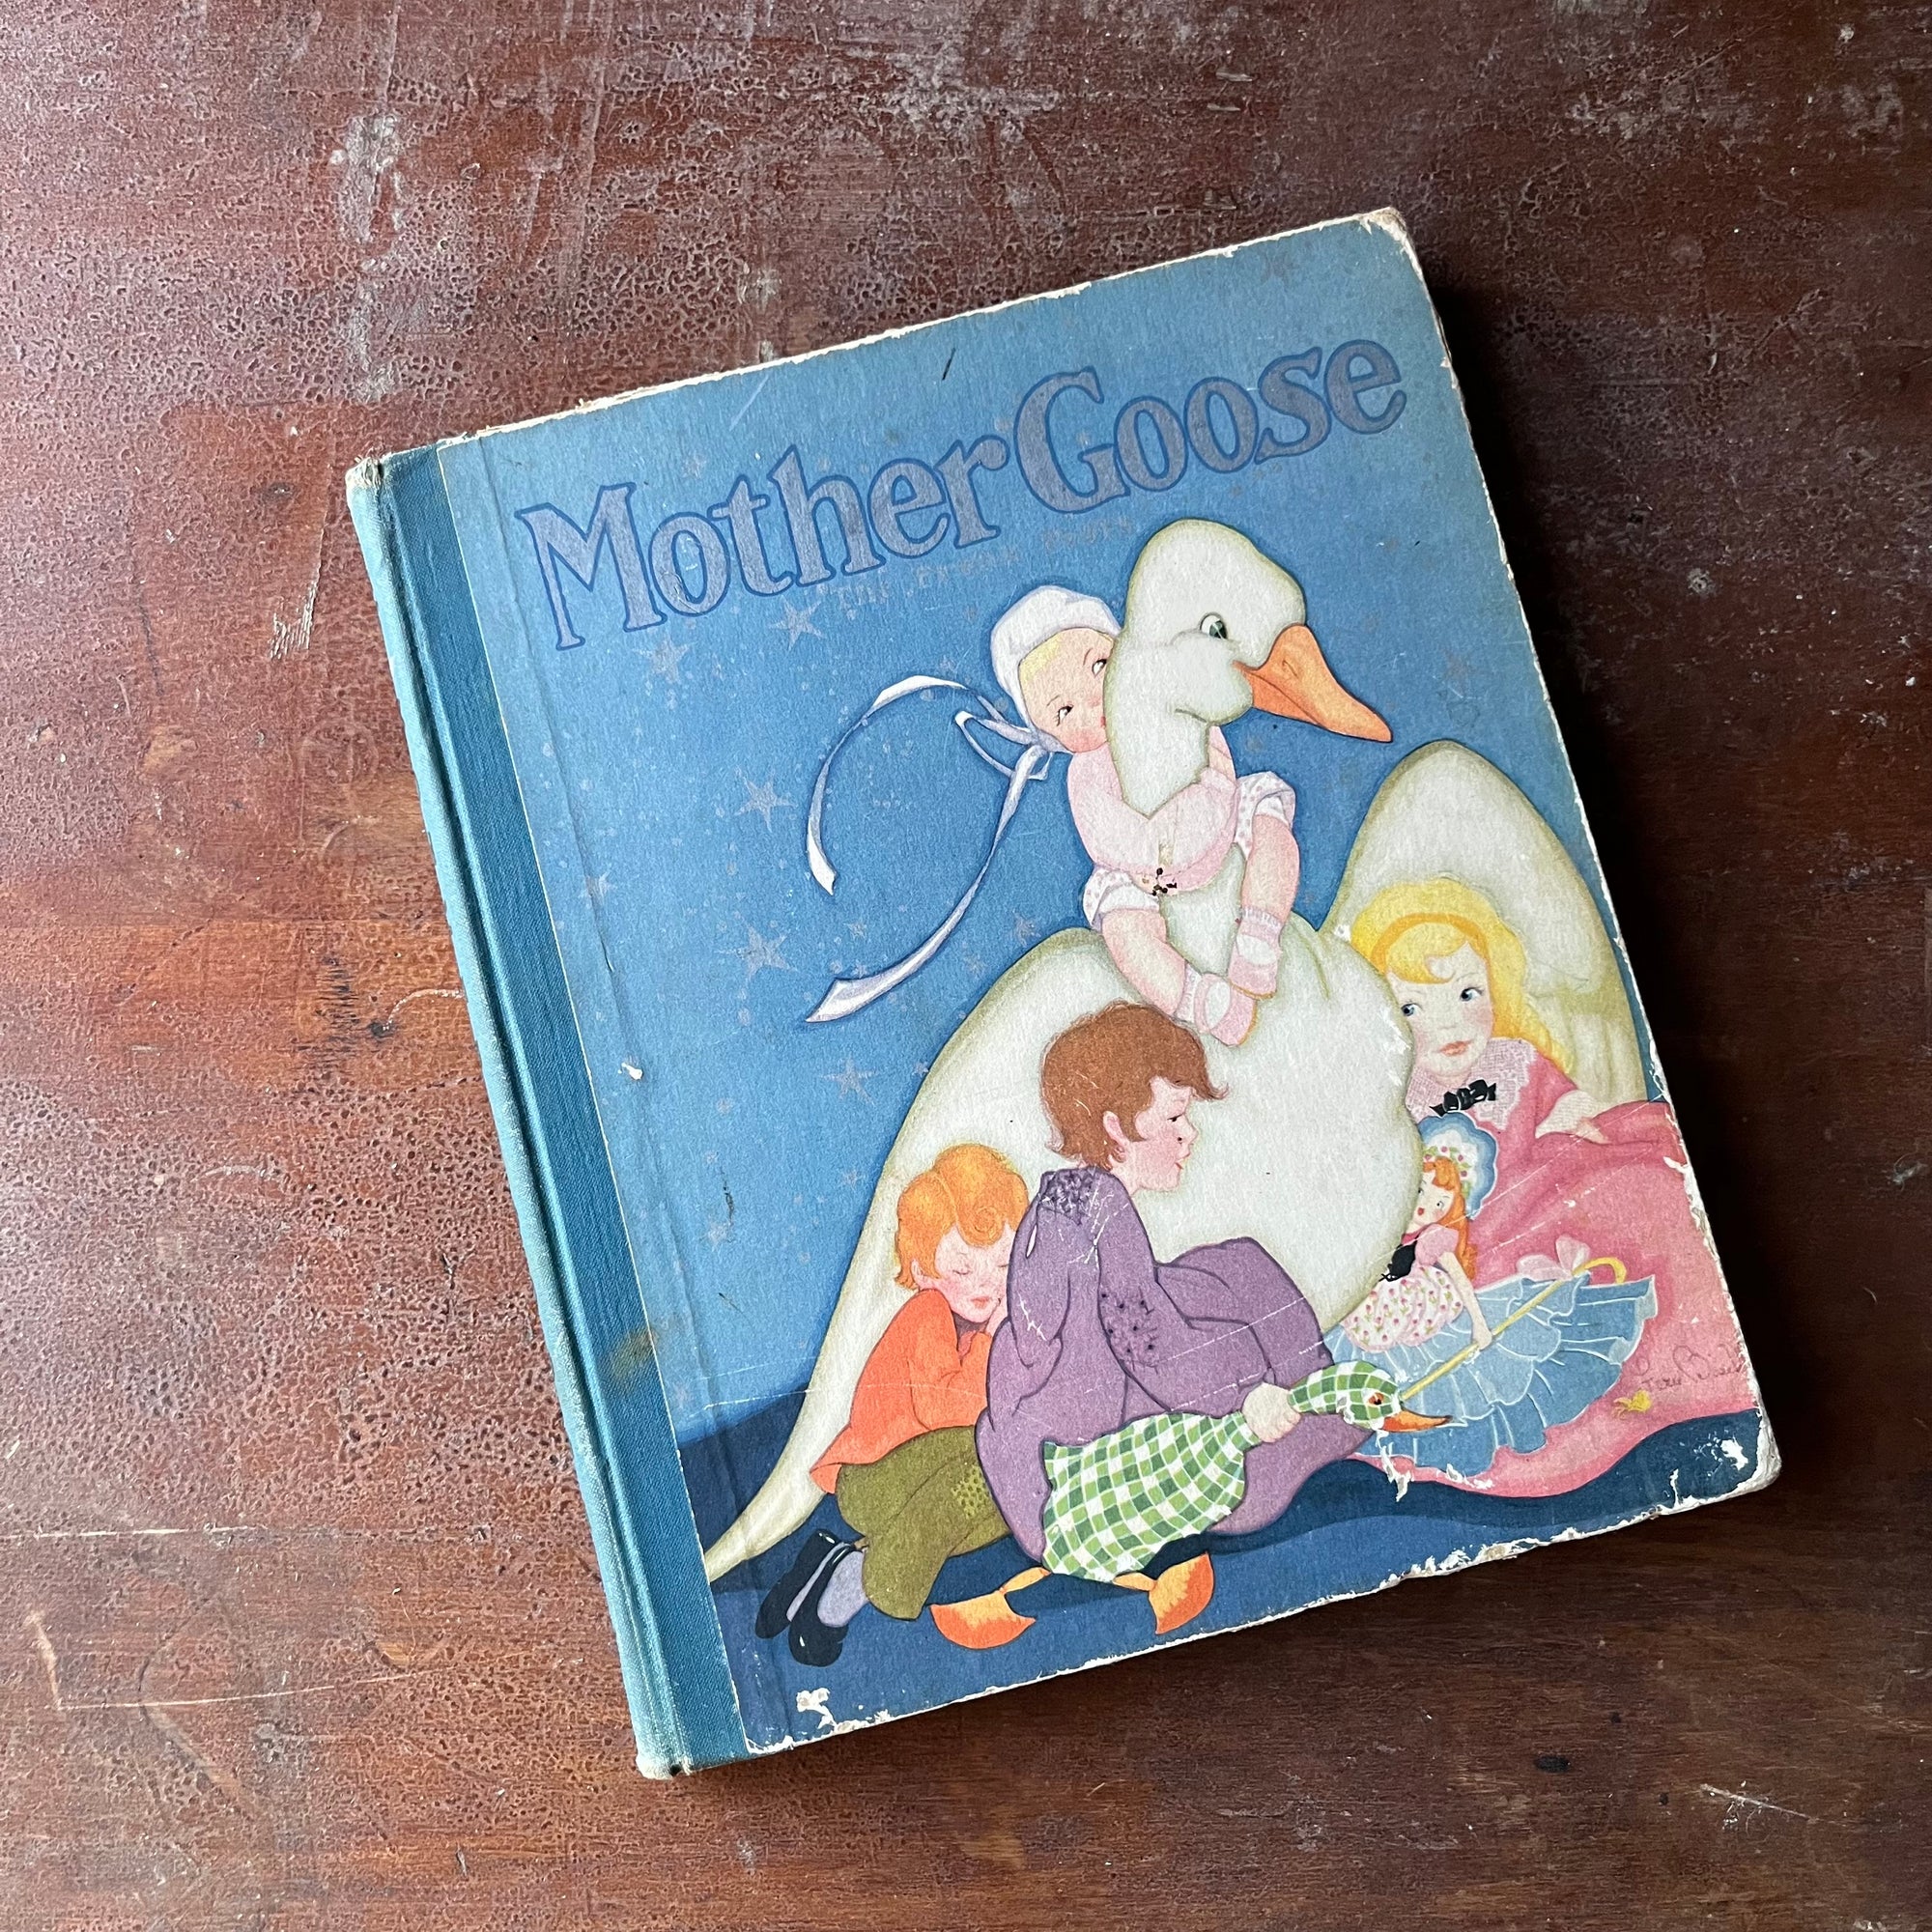 Mother Goose by Fern & Frank Peat-A 1929 Saalfield Publishing Company Edition-vintage children's nursery rhymes-view of the front cover in a gorgeous blue with Mother Goose surrounded by children